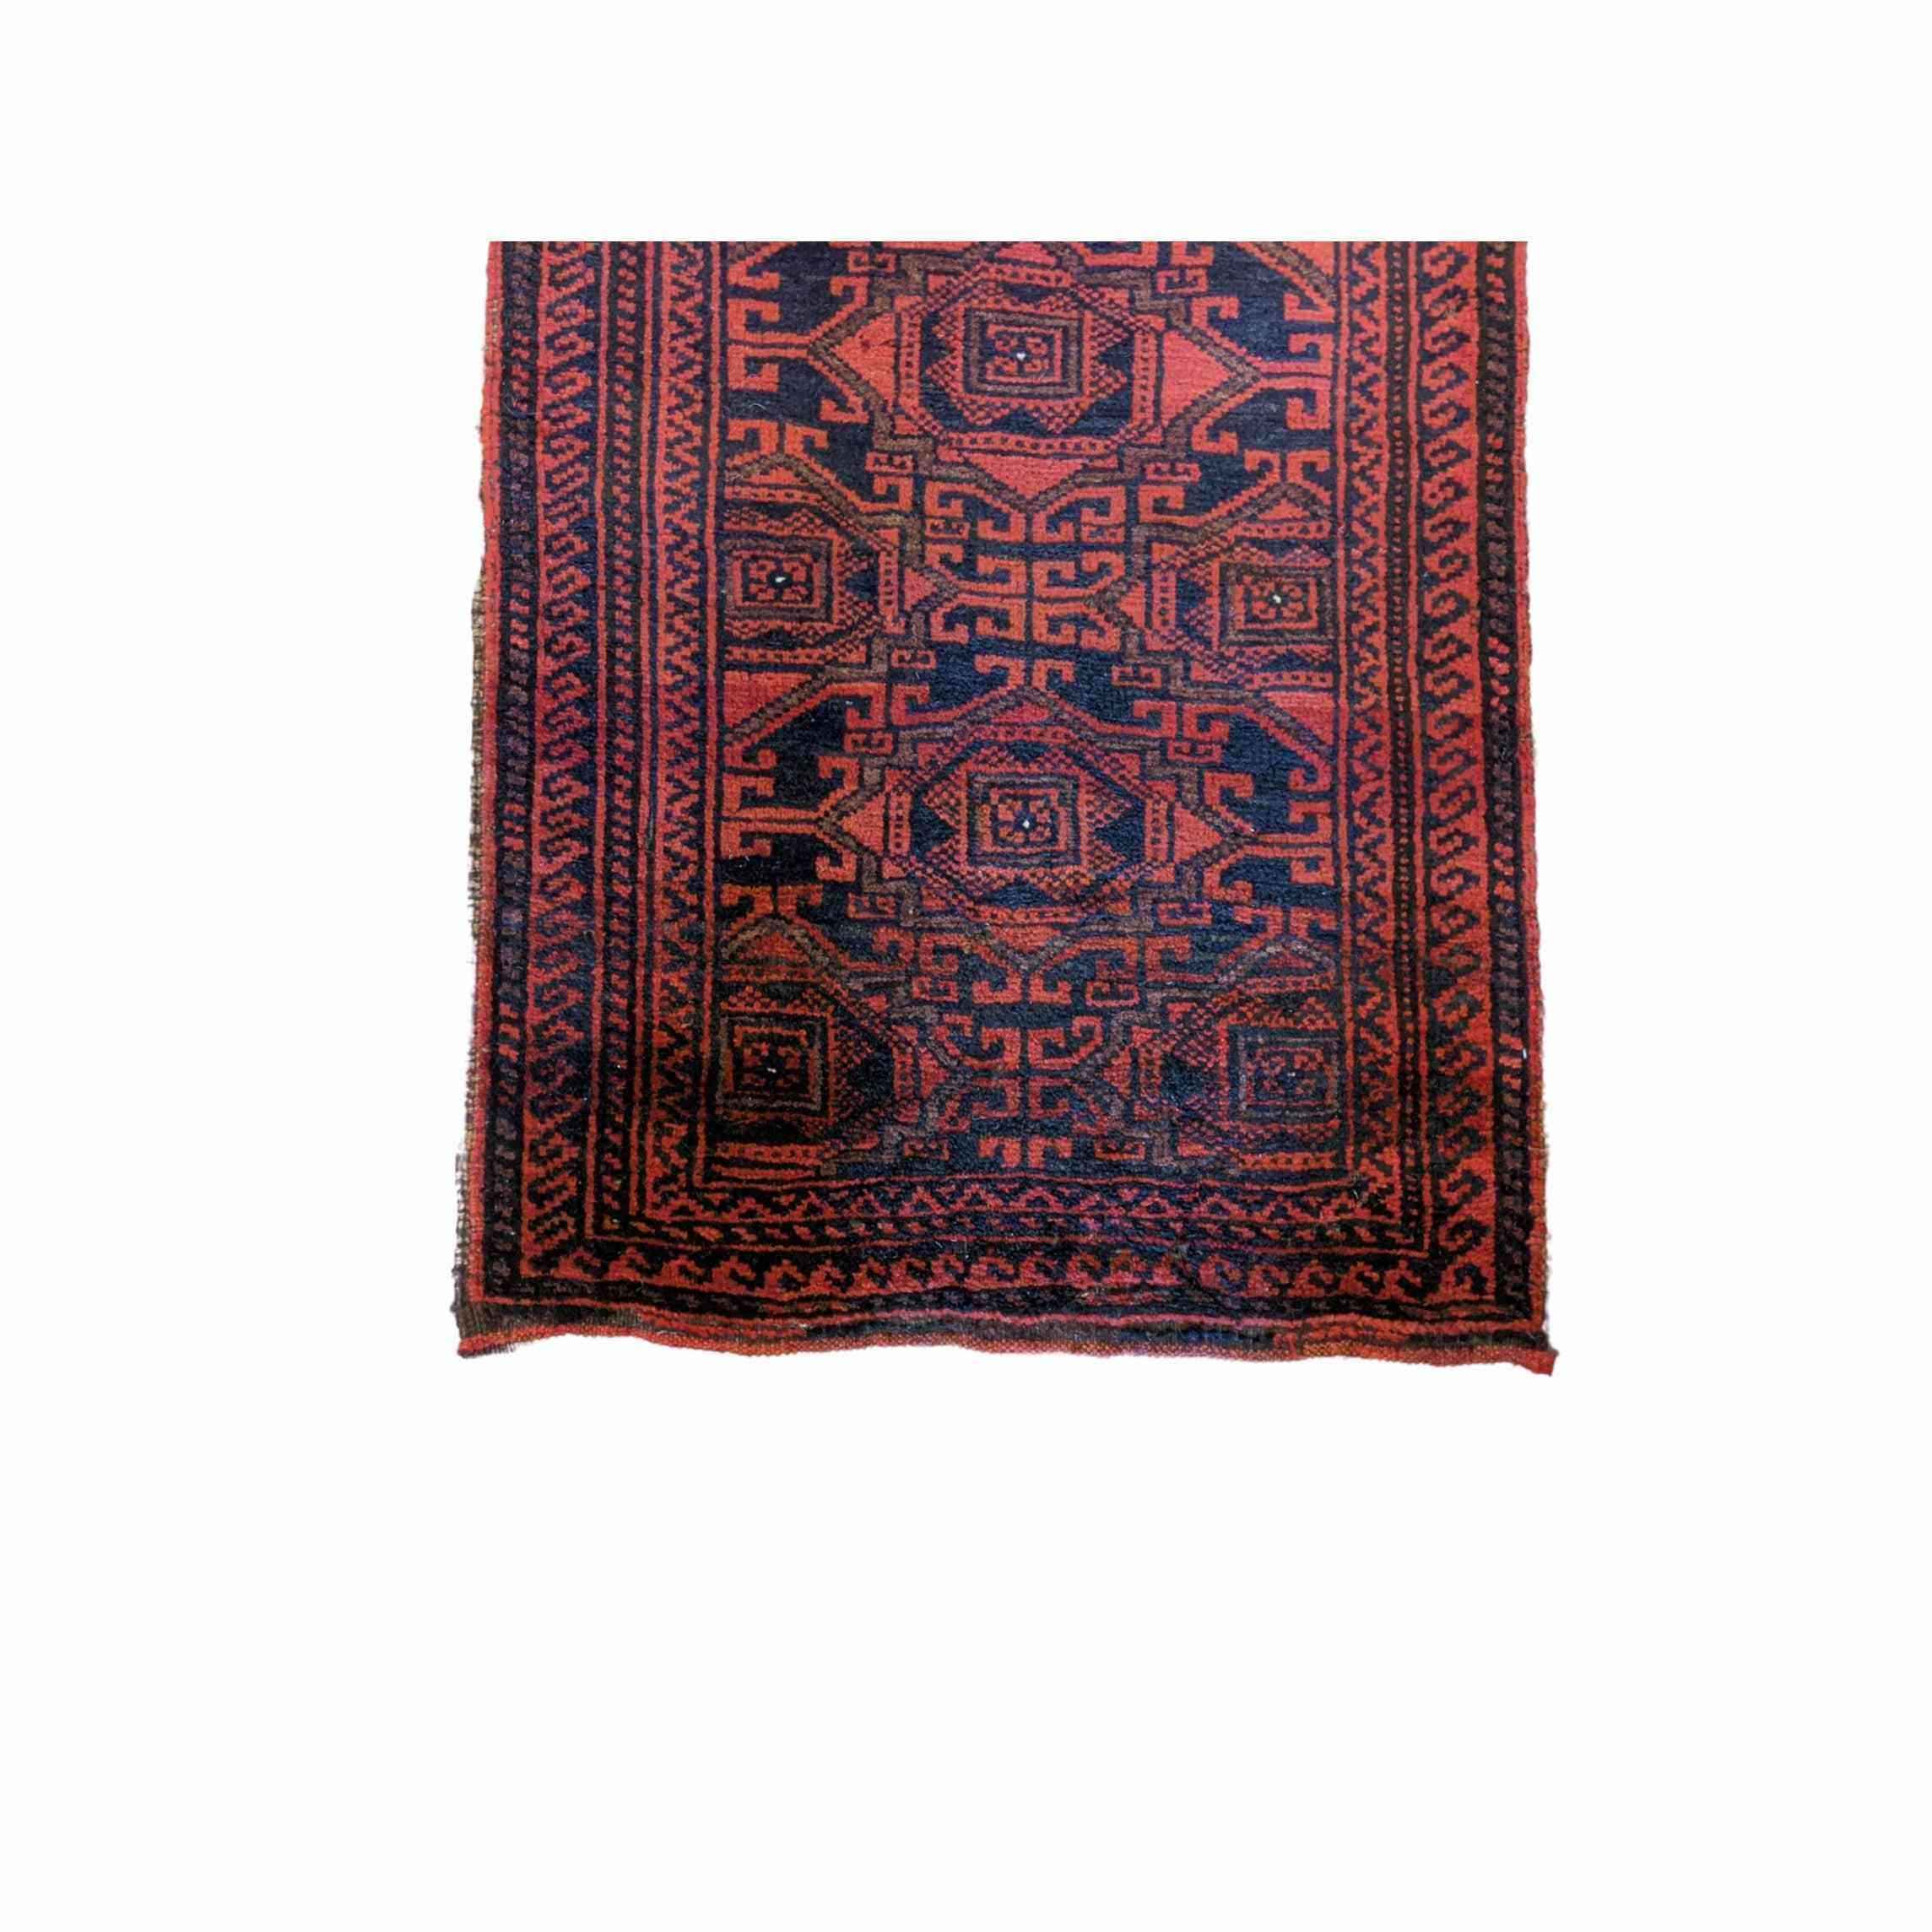 115 x 60 cm Persian Baluch Tribal Red Rug - Rugmaster